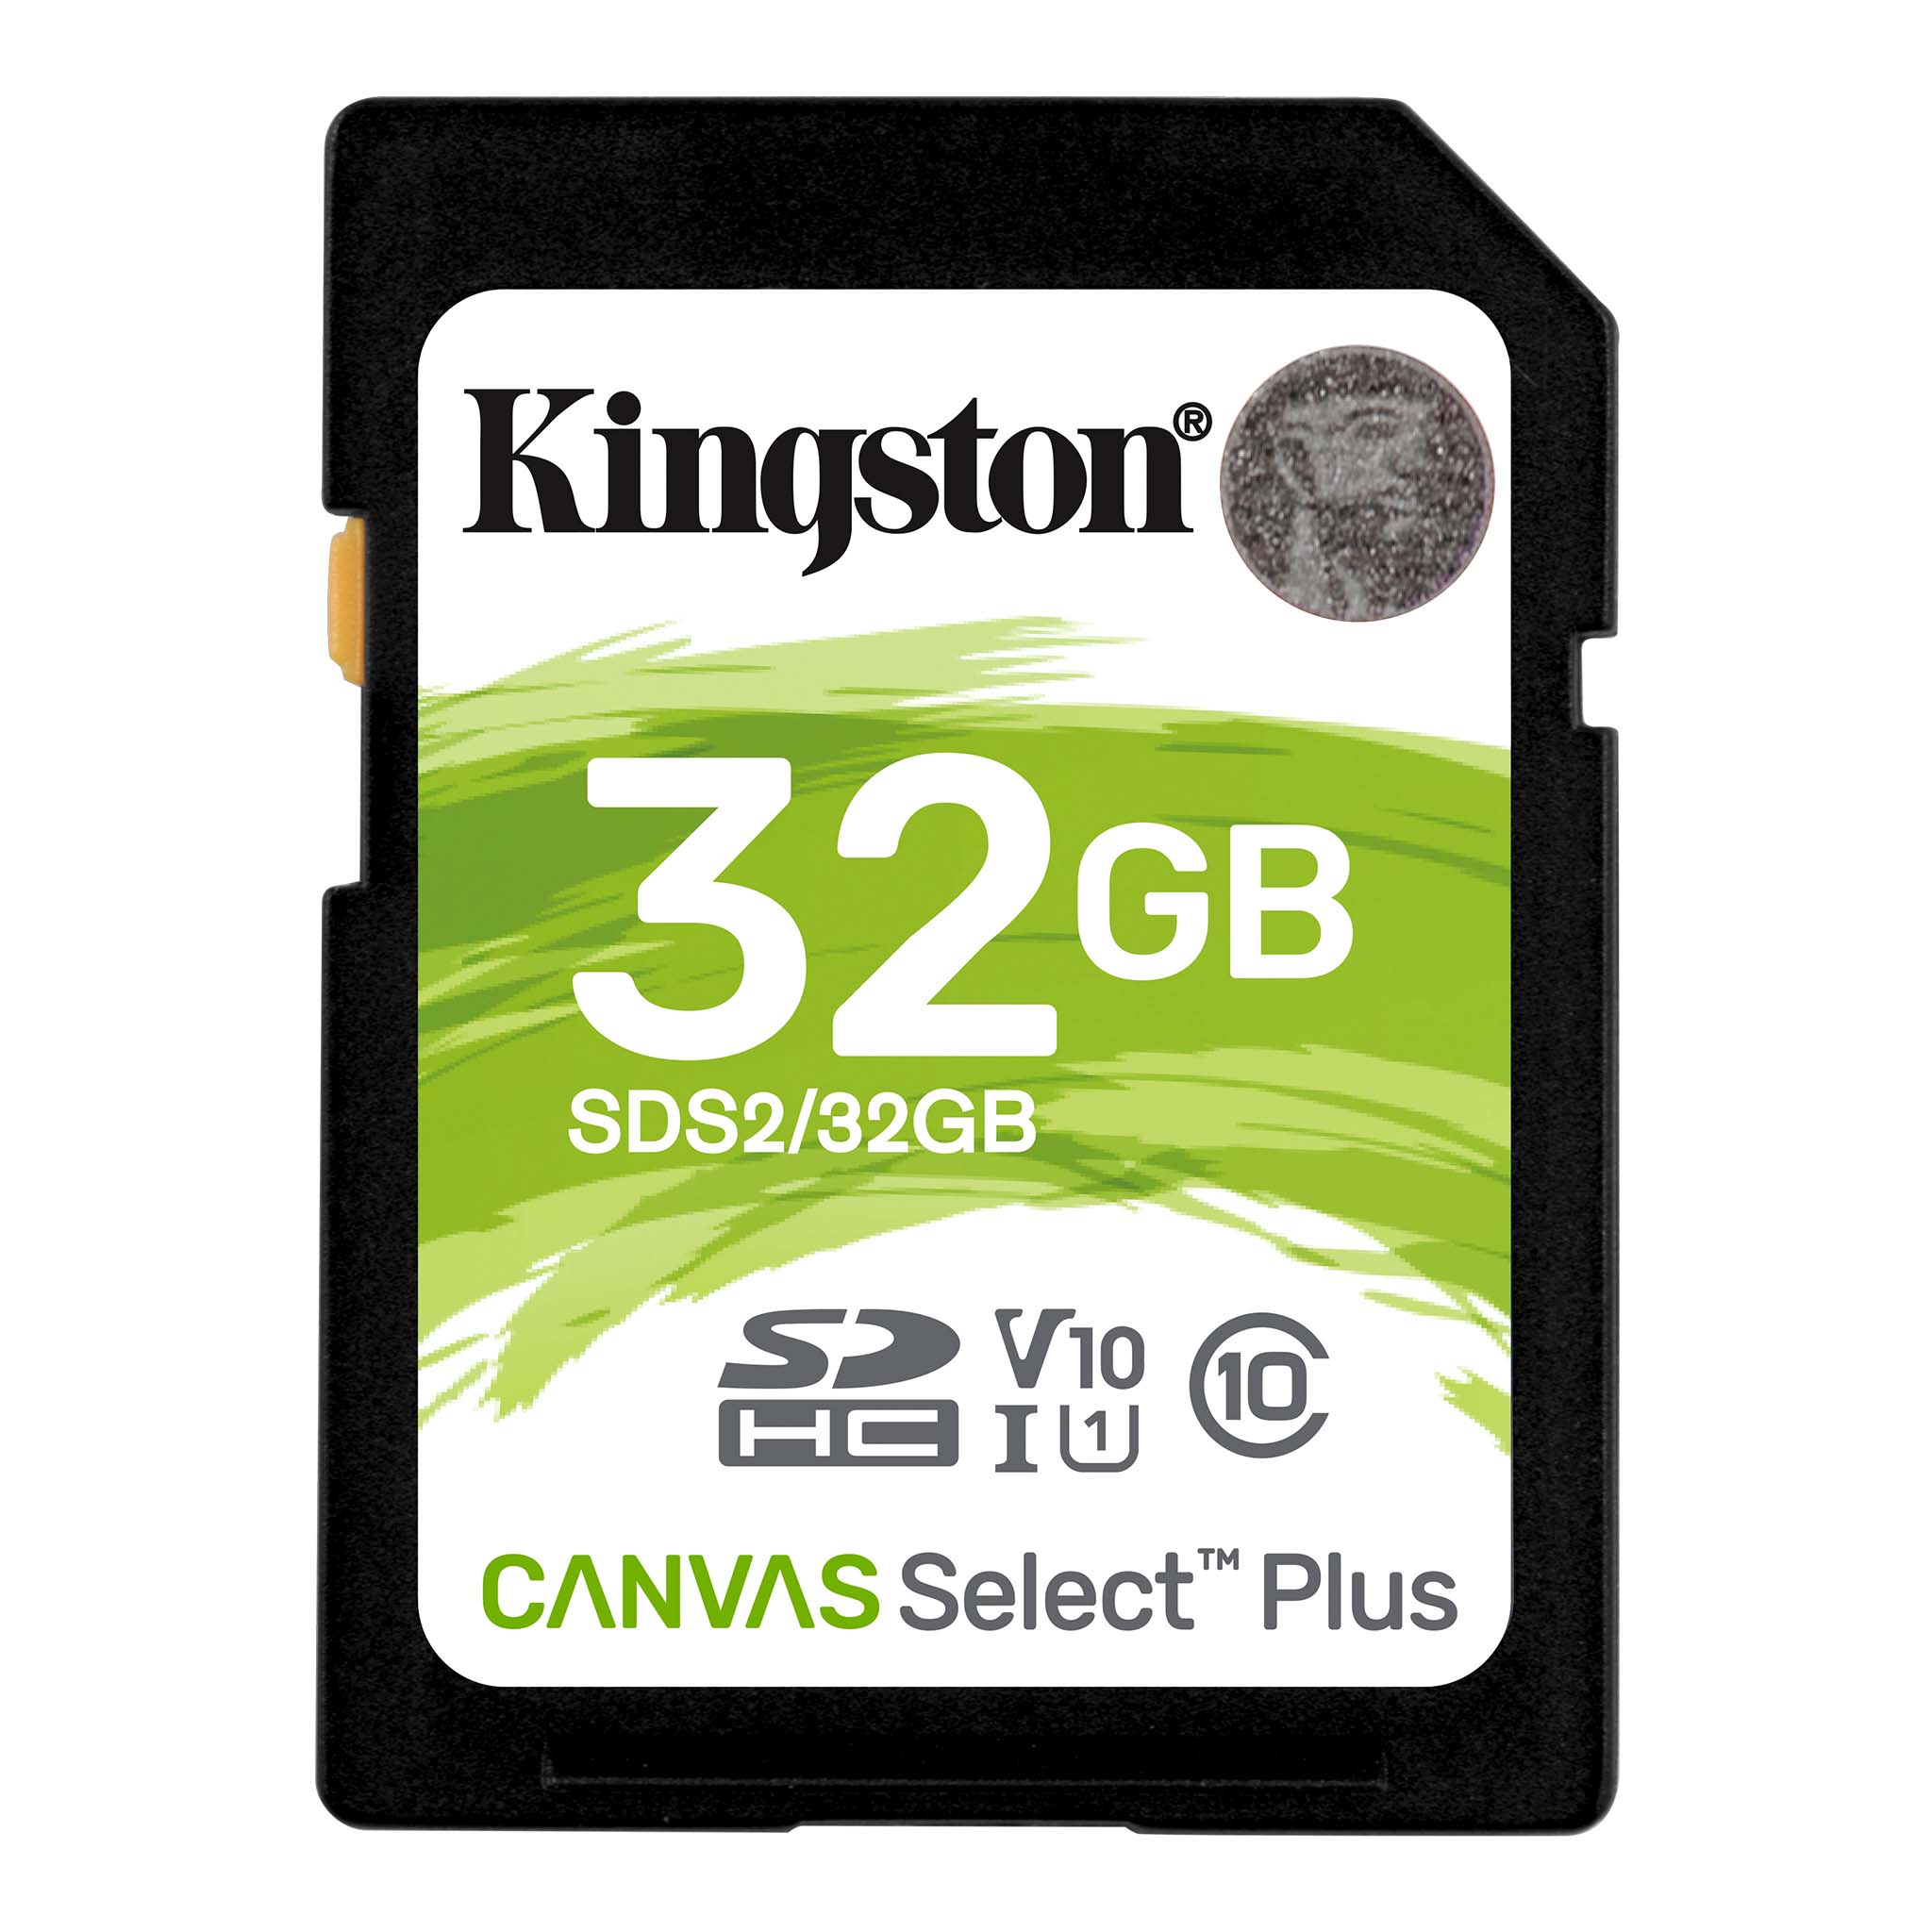 100MBs Works with Kingston Kingston 32GB Sony H8416 MicroSDHC Canvas Select Plus Card Verified by SanFlash. 